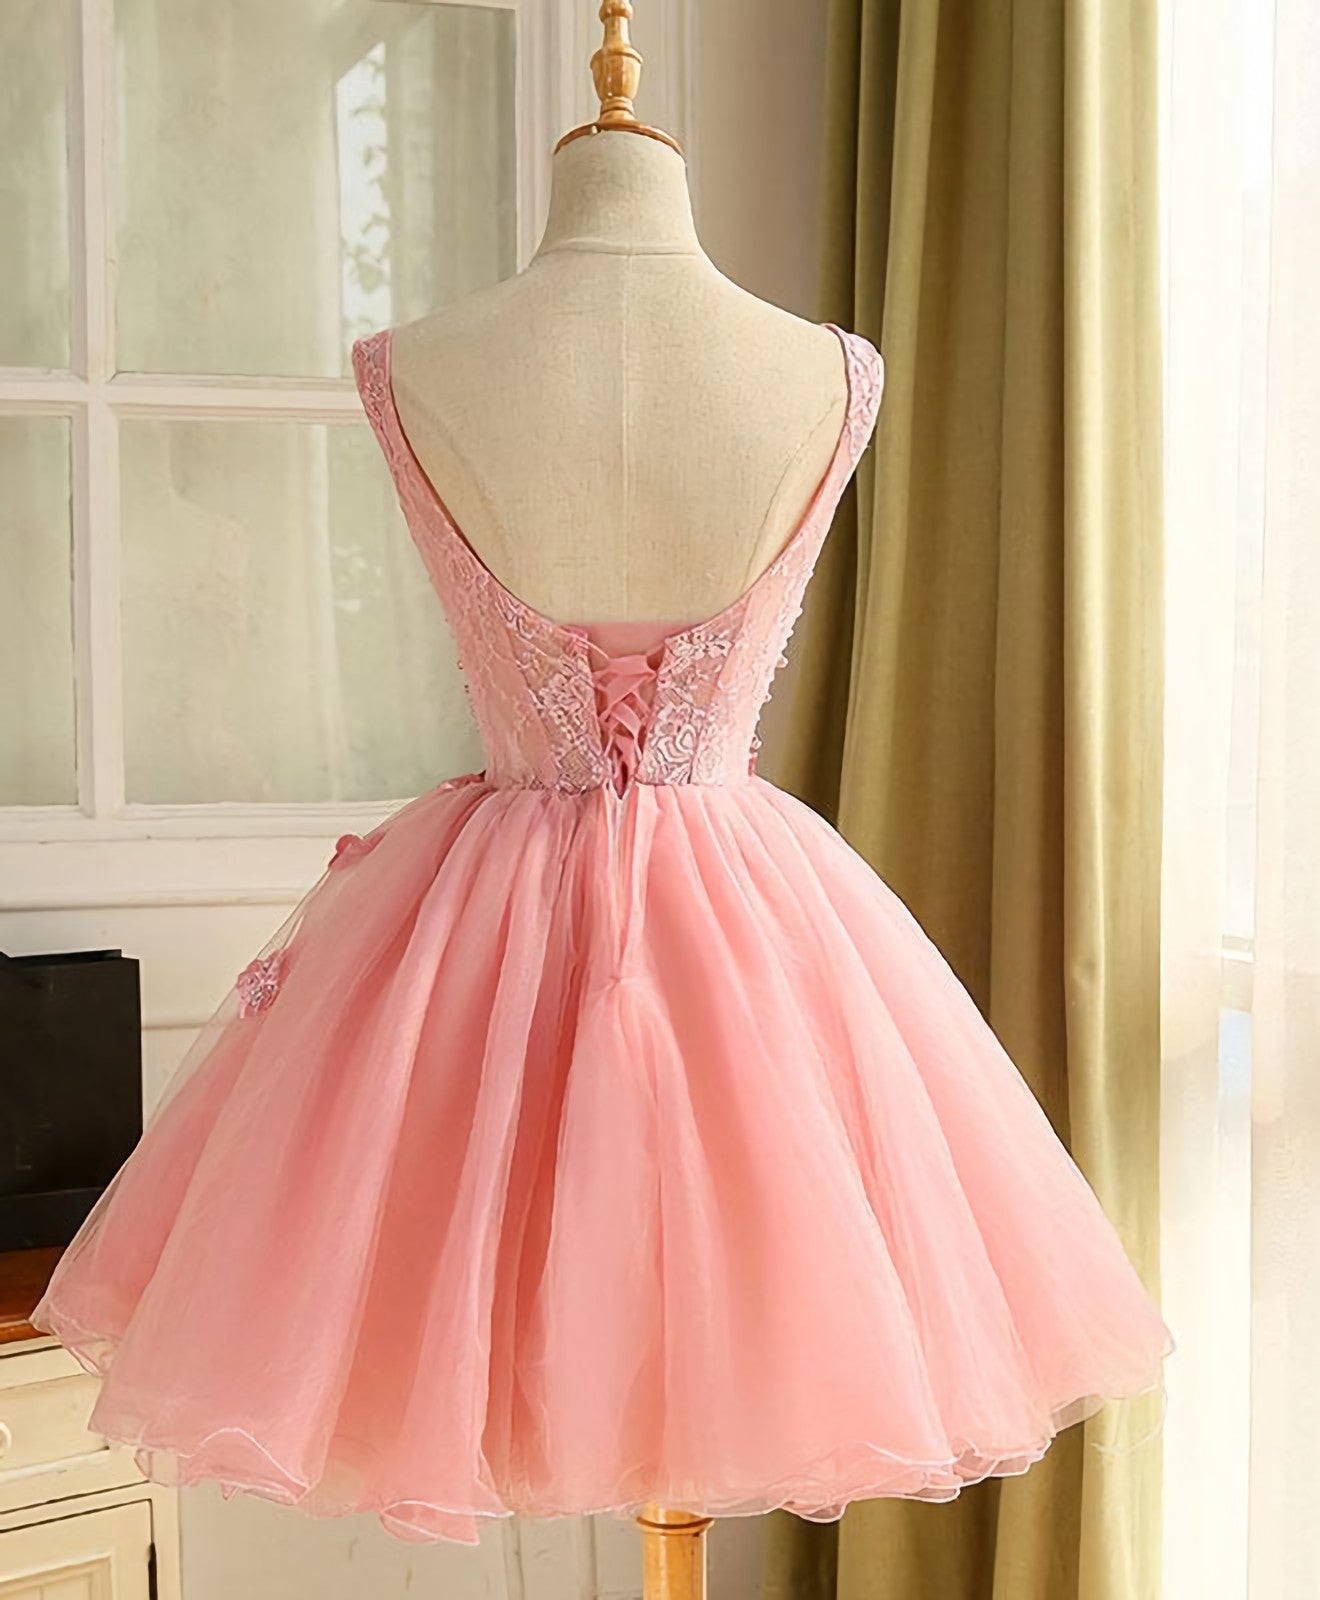 Prom Dress Sites, Cute A Line Pink Tulle Pearl Short Prom Dress, Homecoming Dress